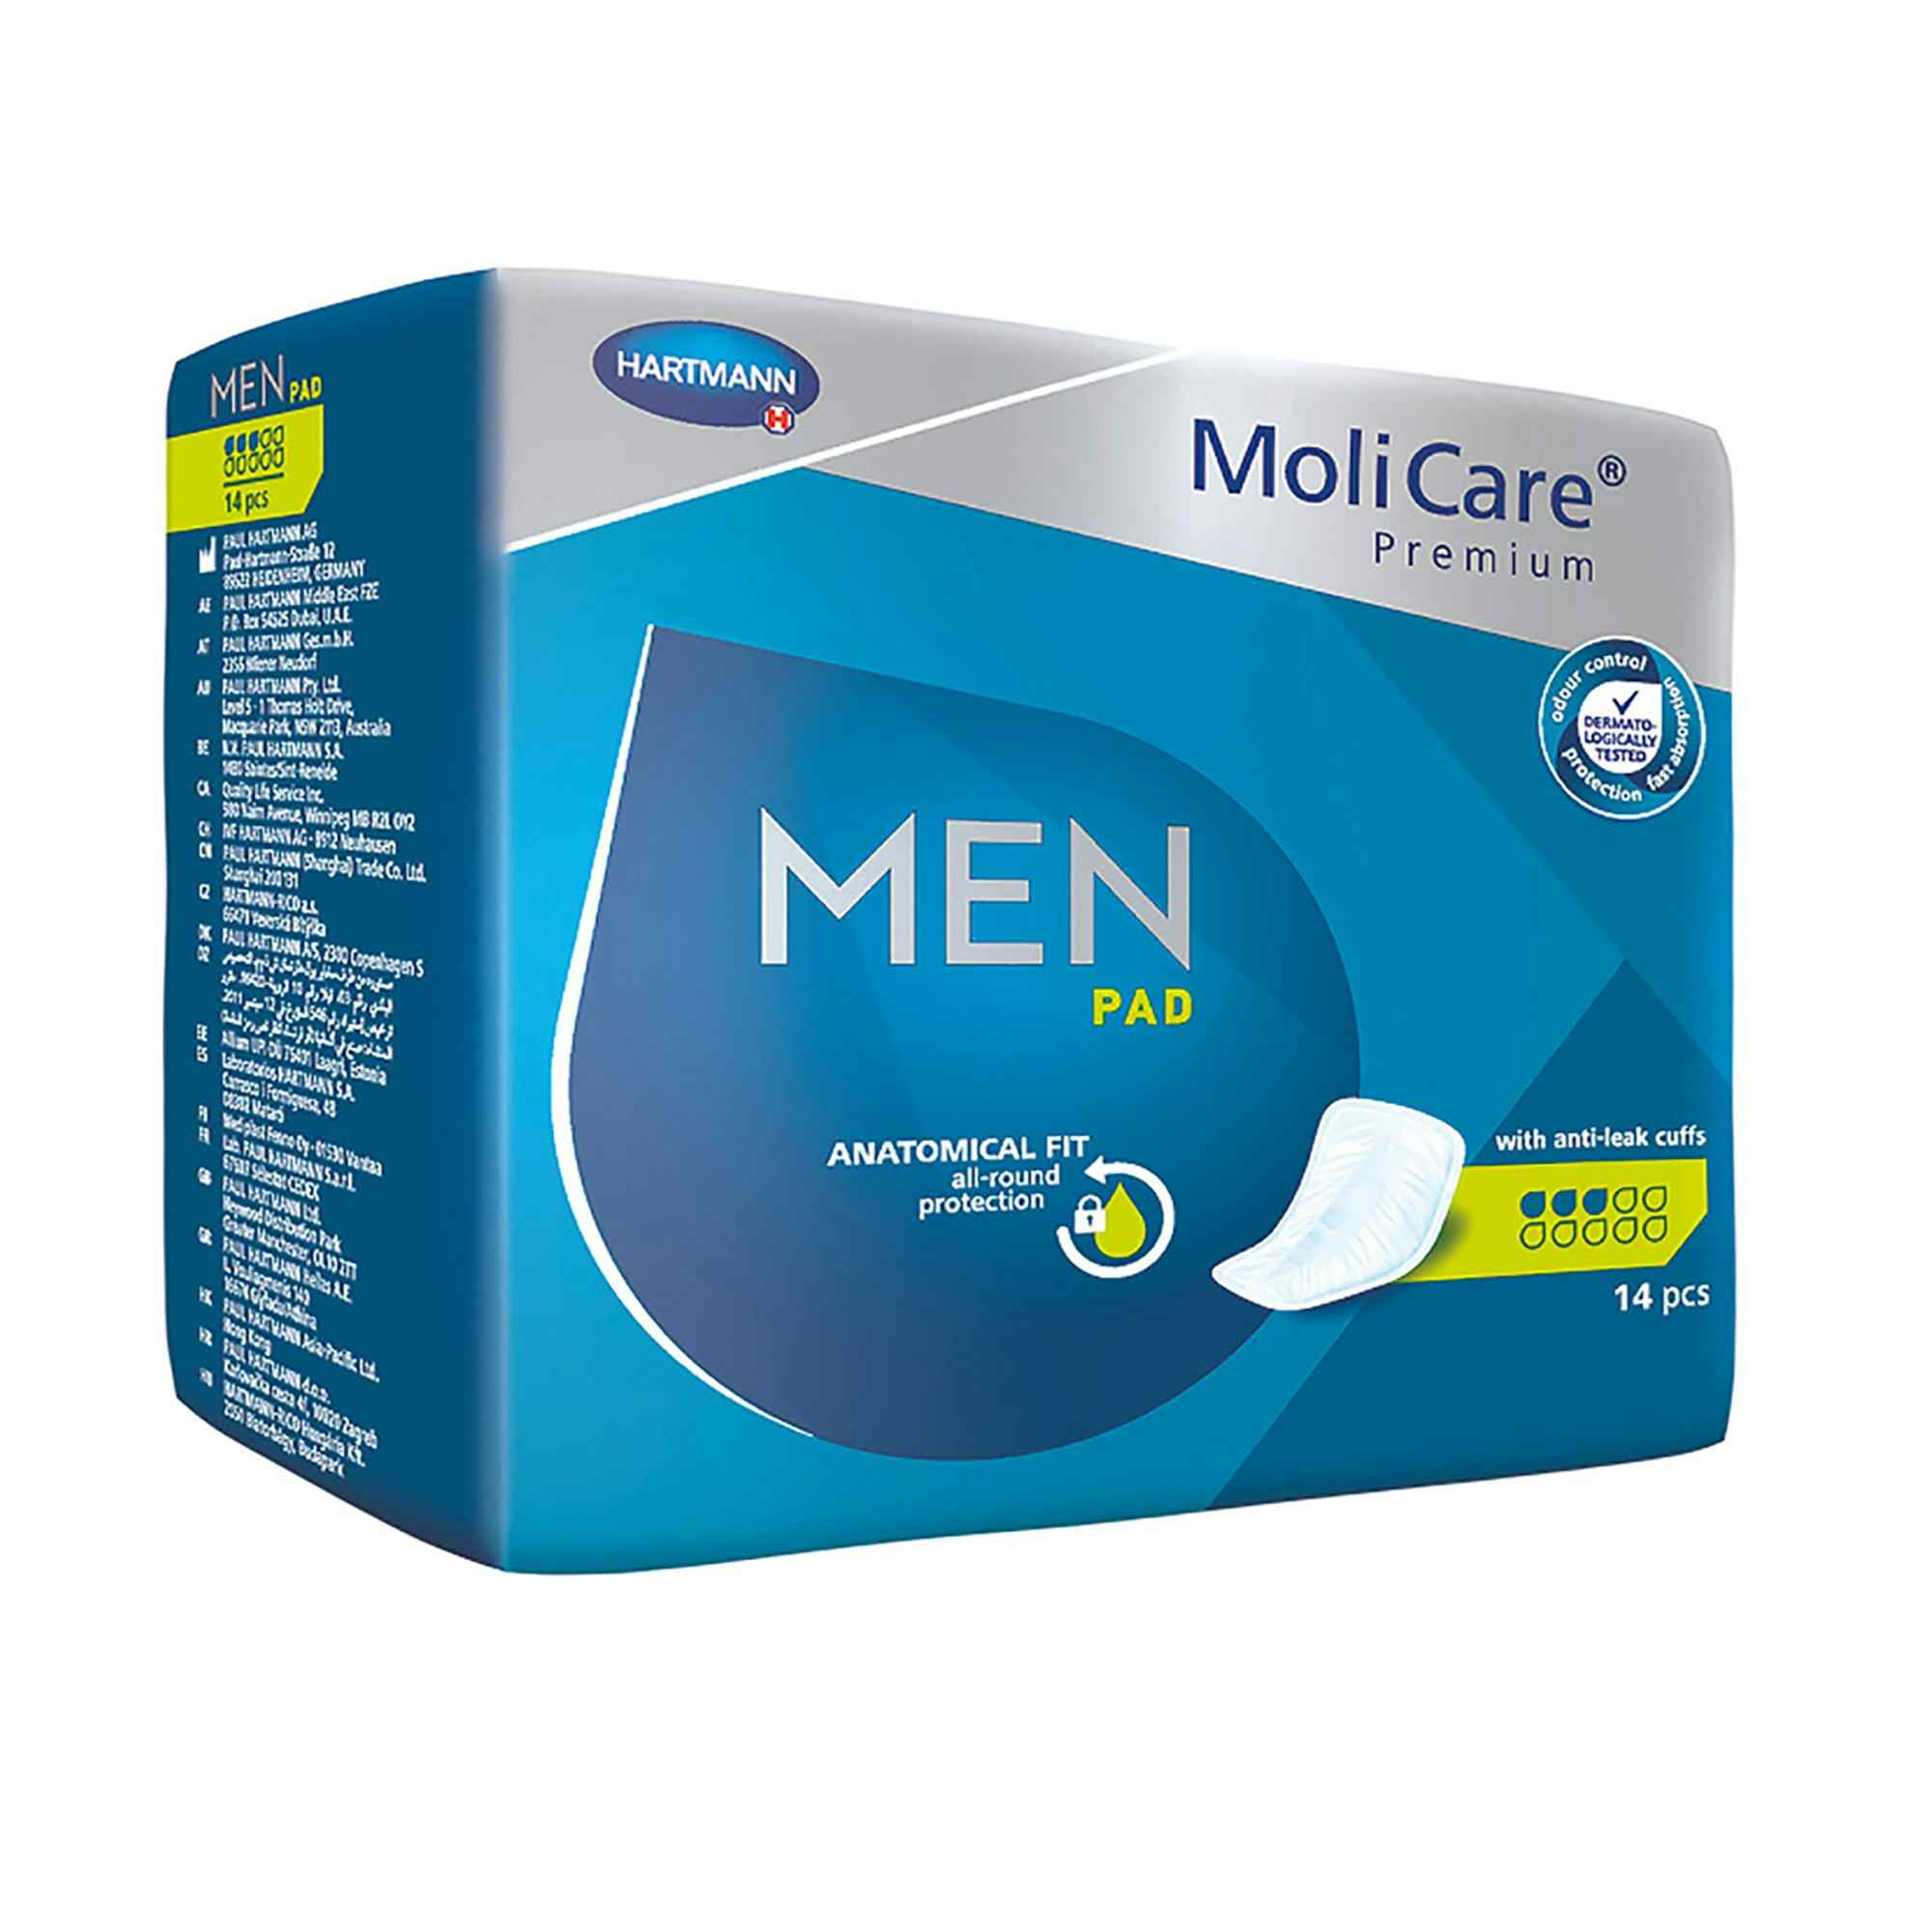 MoliCare Premium Men's Bladder Control Pad, Light Absorbency, 168603, One Size Fits Most - Bag of 14